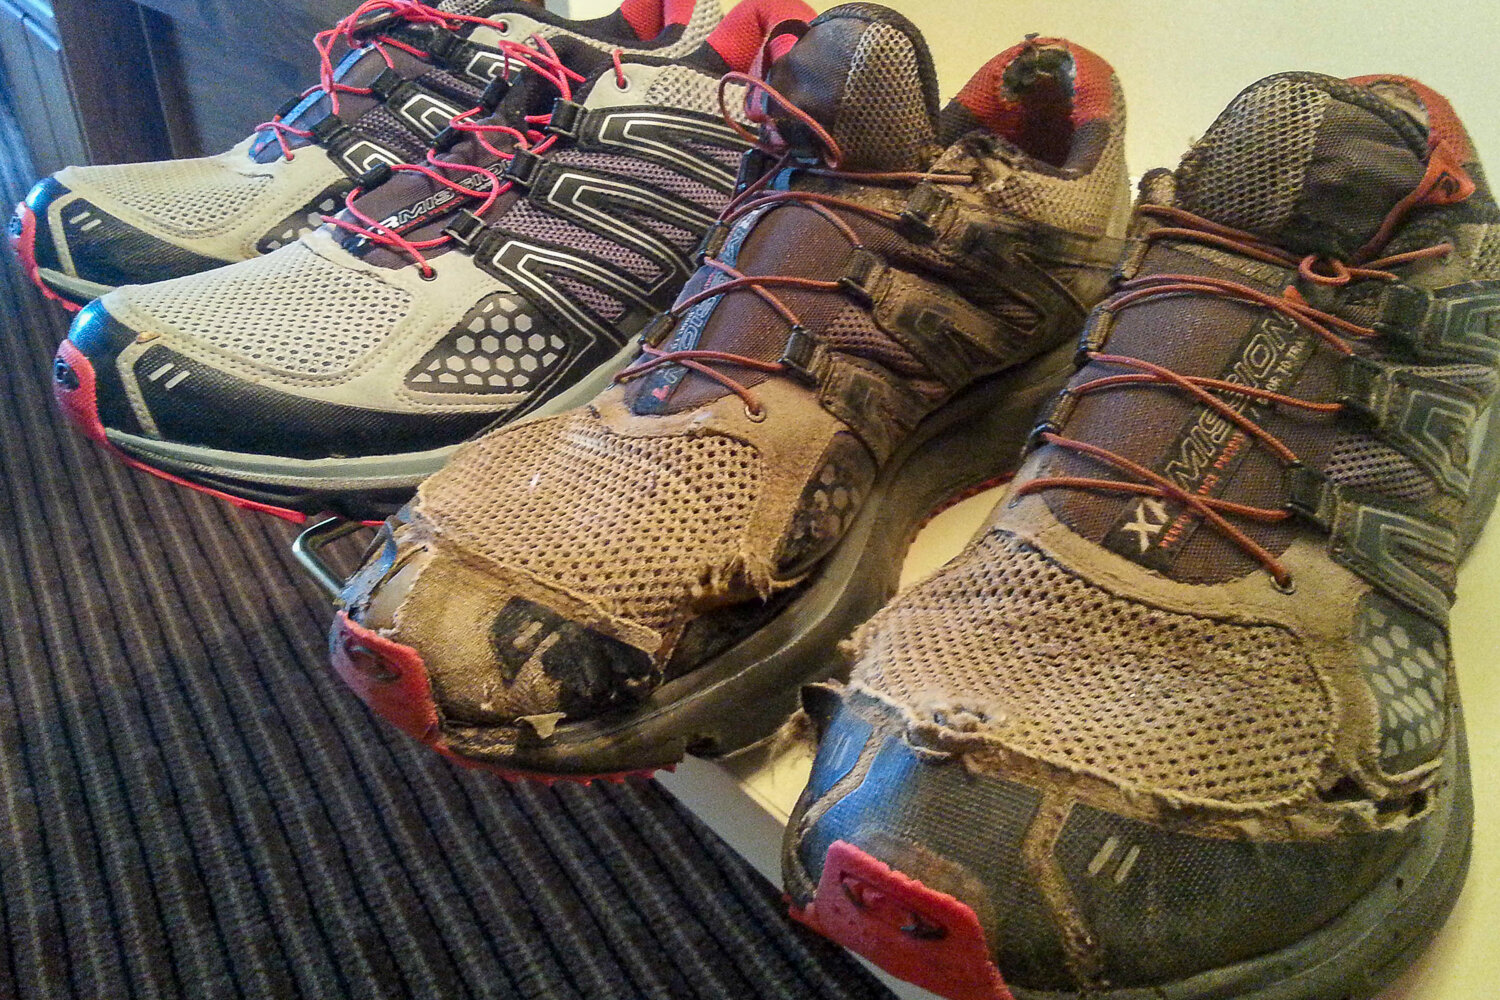 CDT thru-hikers go through an average of 4-5 pairs of trail running shoes